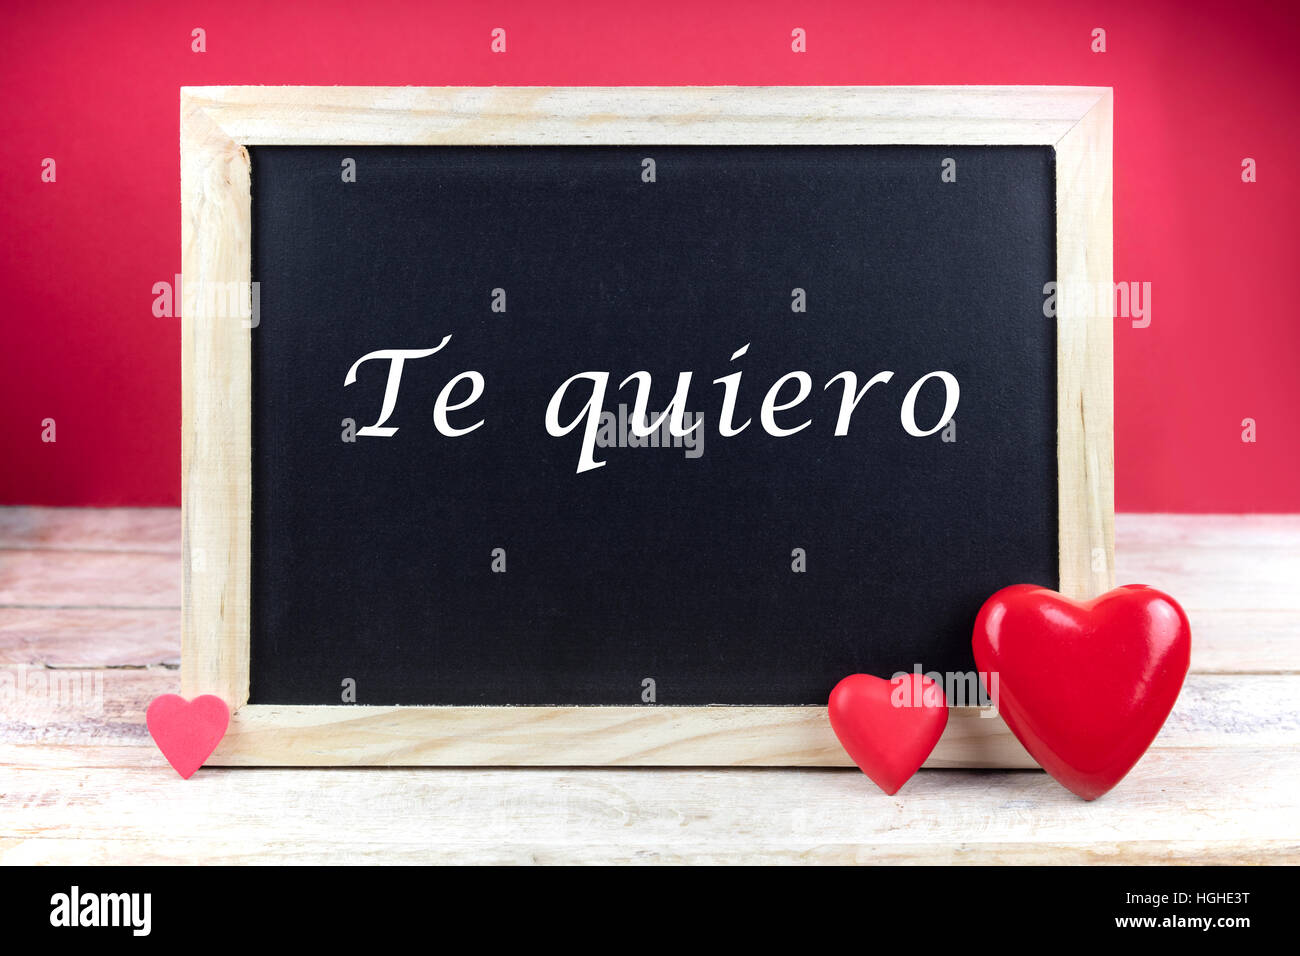 Wooden blackboard with red hearts and written sentence in Spanish 'Te quiero', which means 'I love you', in red background. Stock Photo